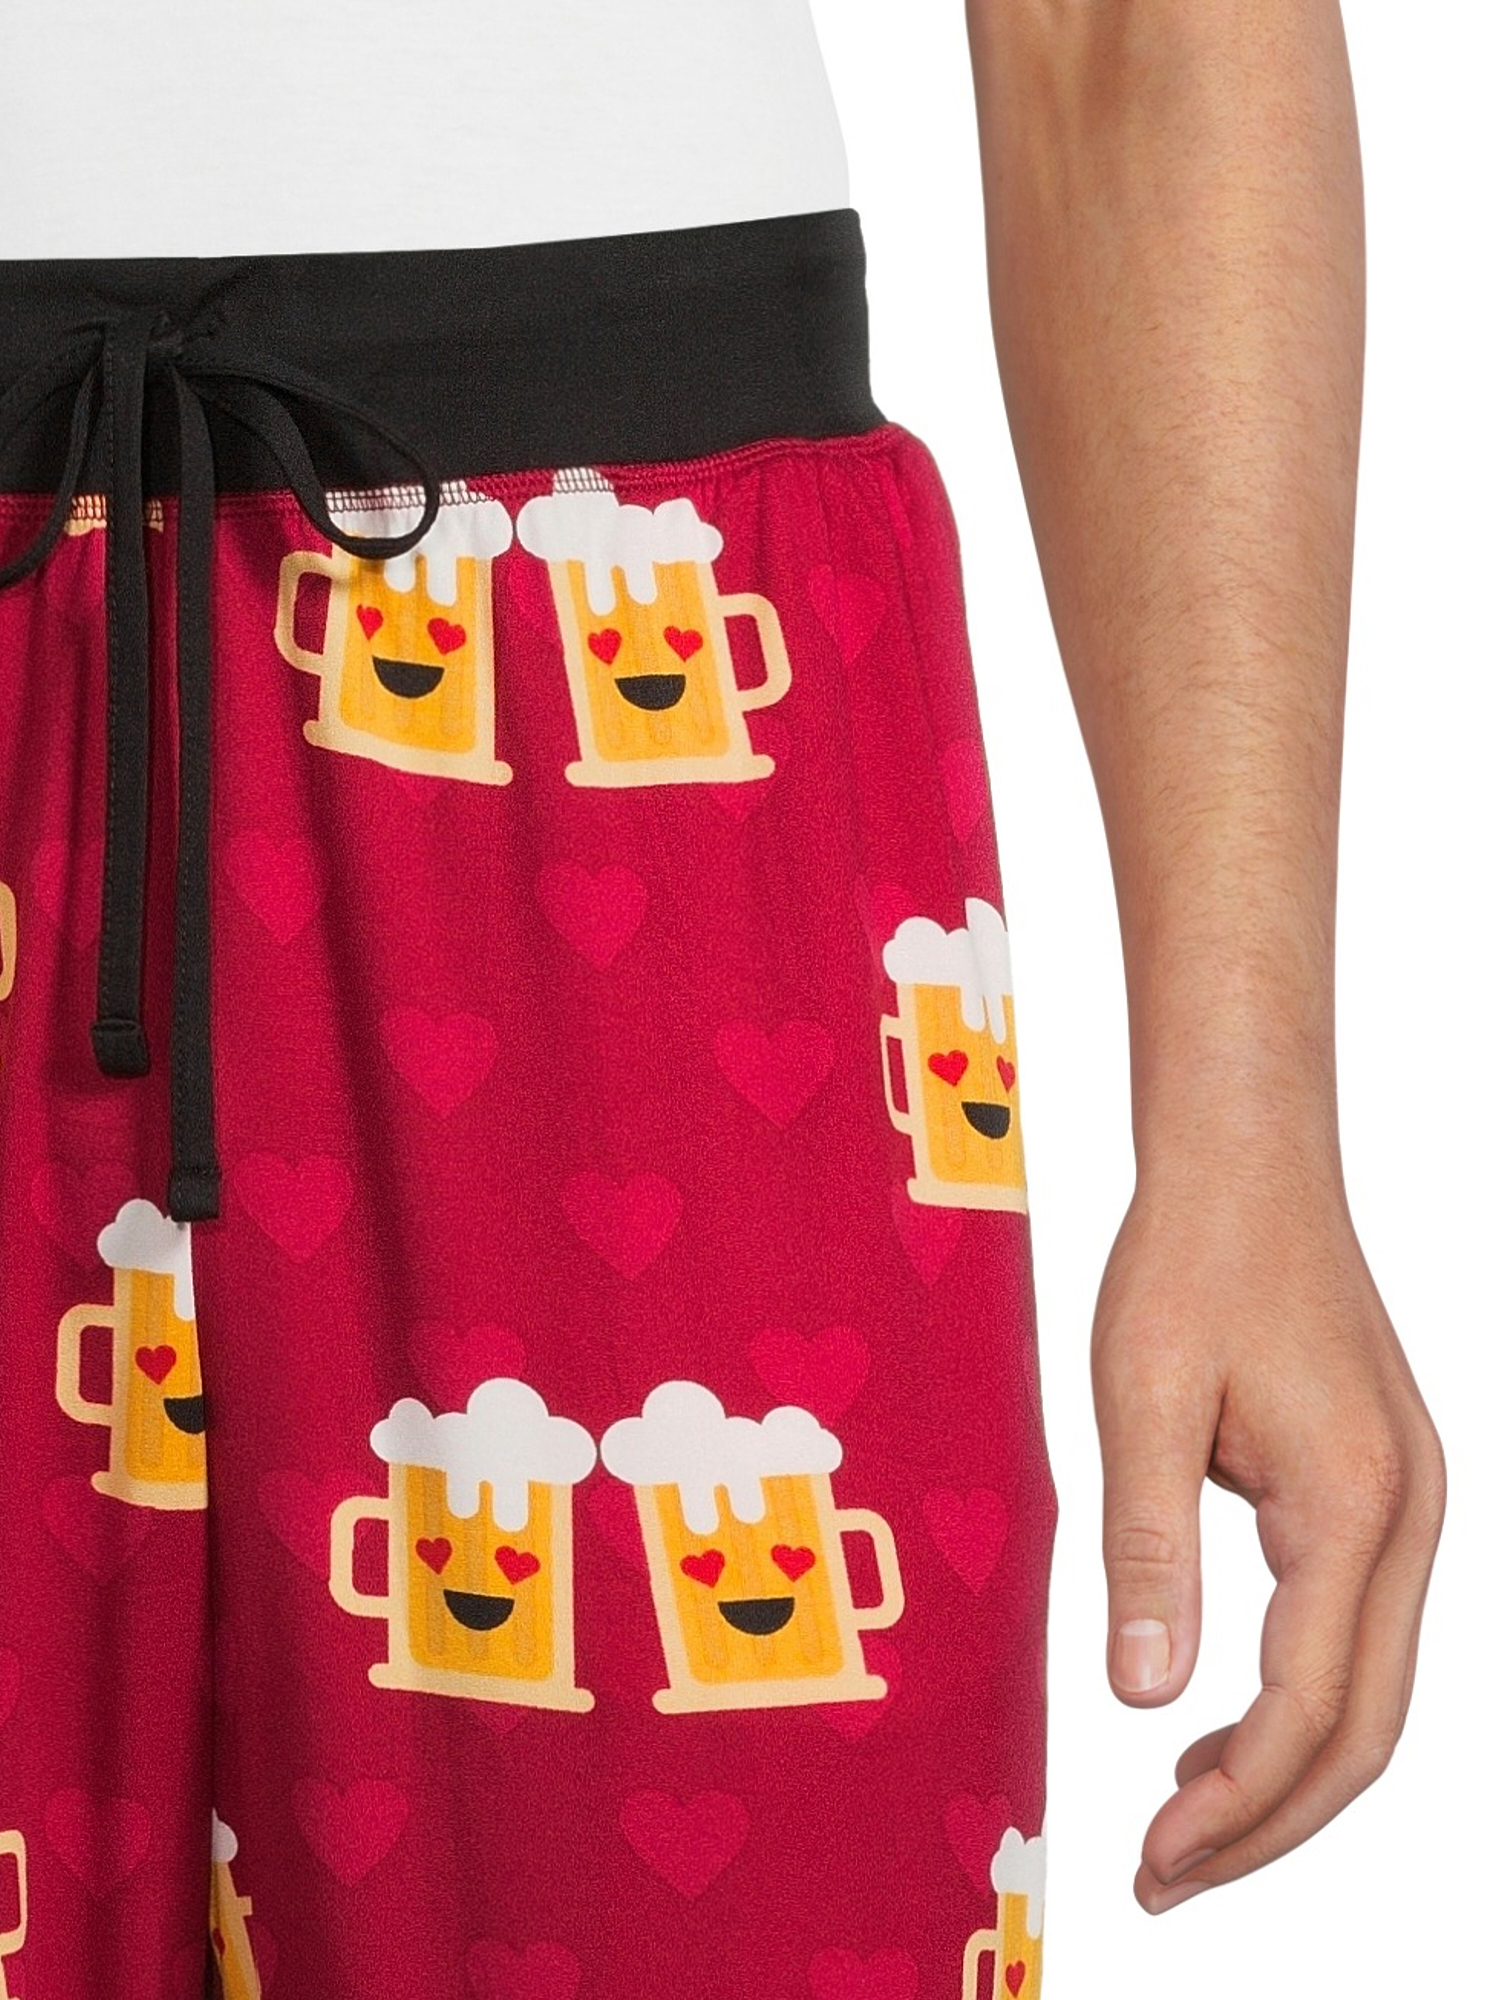 Valentine's Day Men's and Big Men's Sleep Pants, 2-Pack, Heather Red and Match Made Beer Designs - image 5 of 5